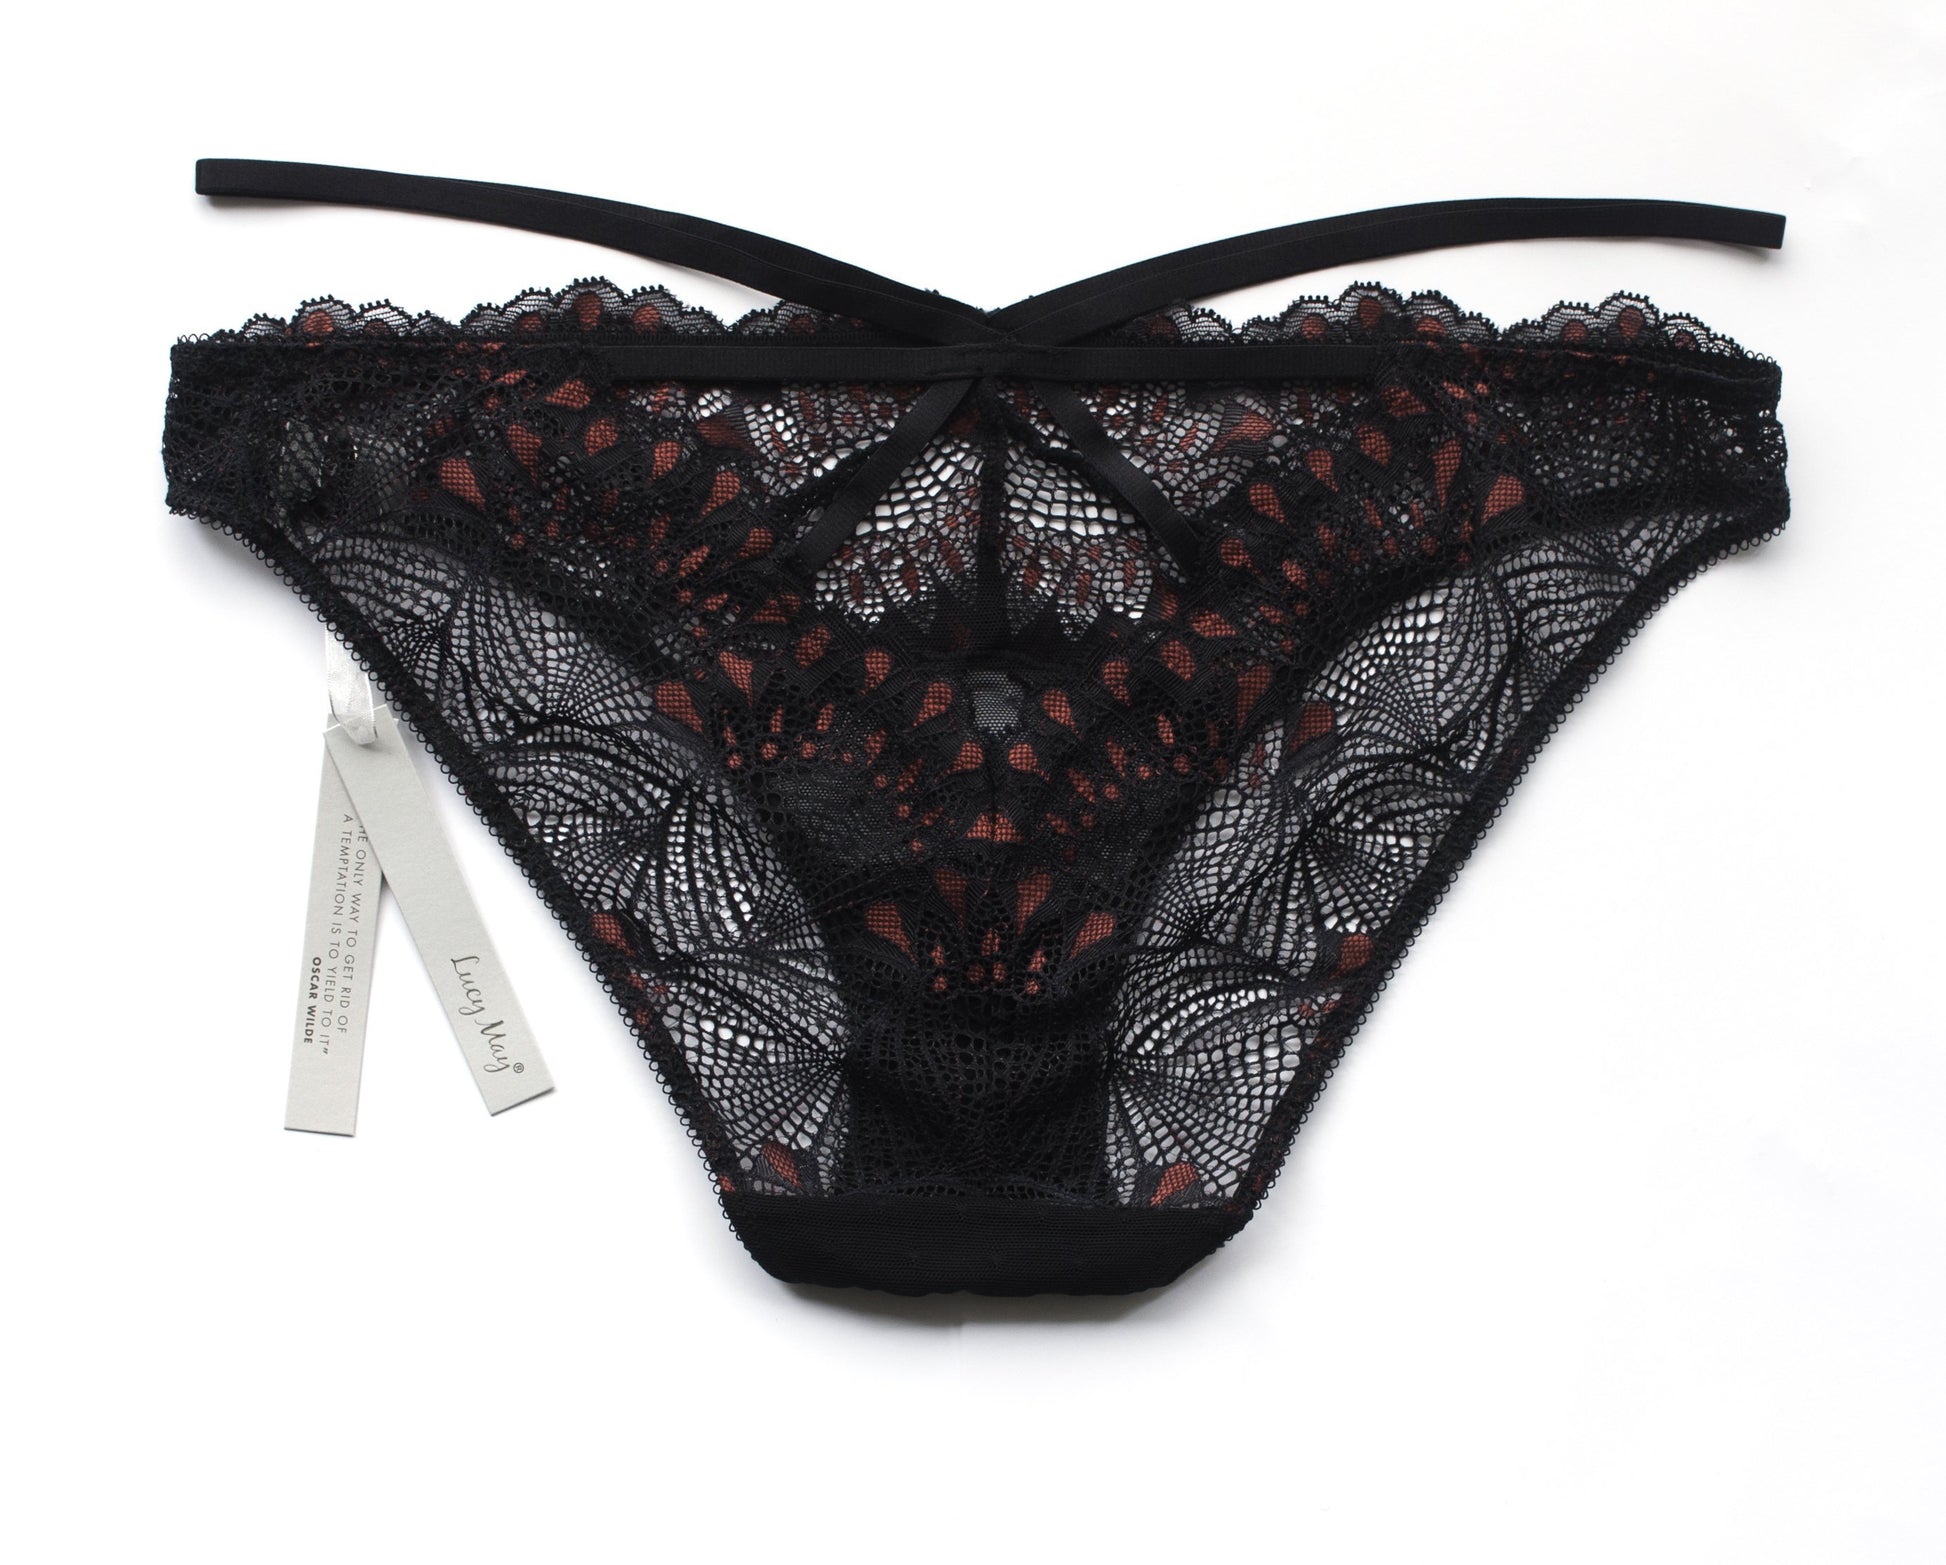 Black & red lace Lucy May Maybella Brief back view